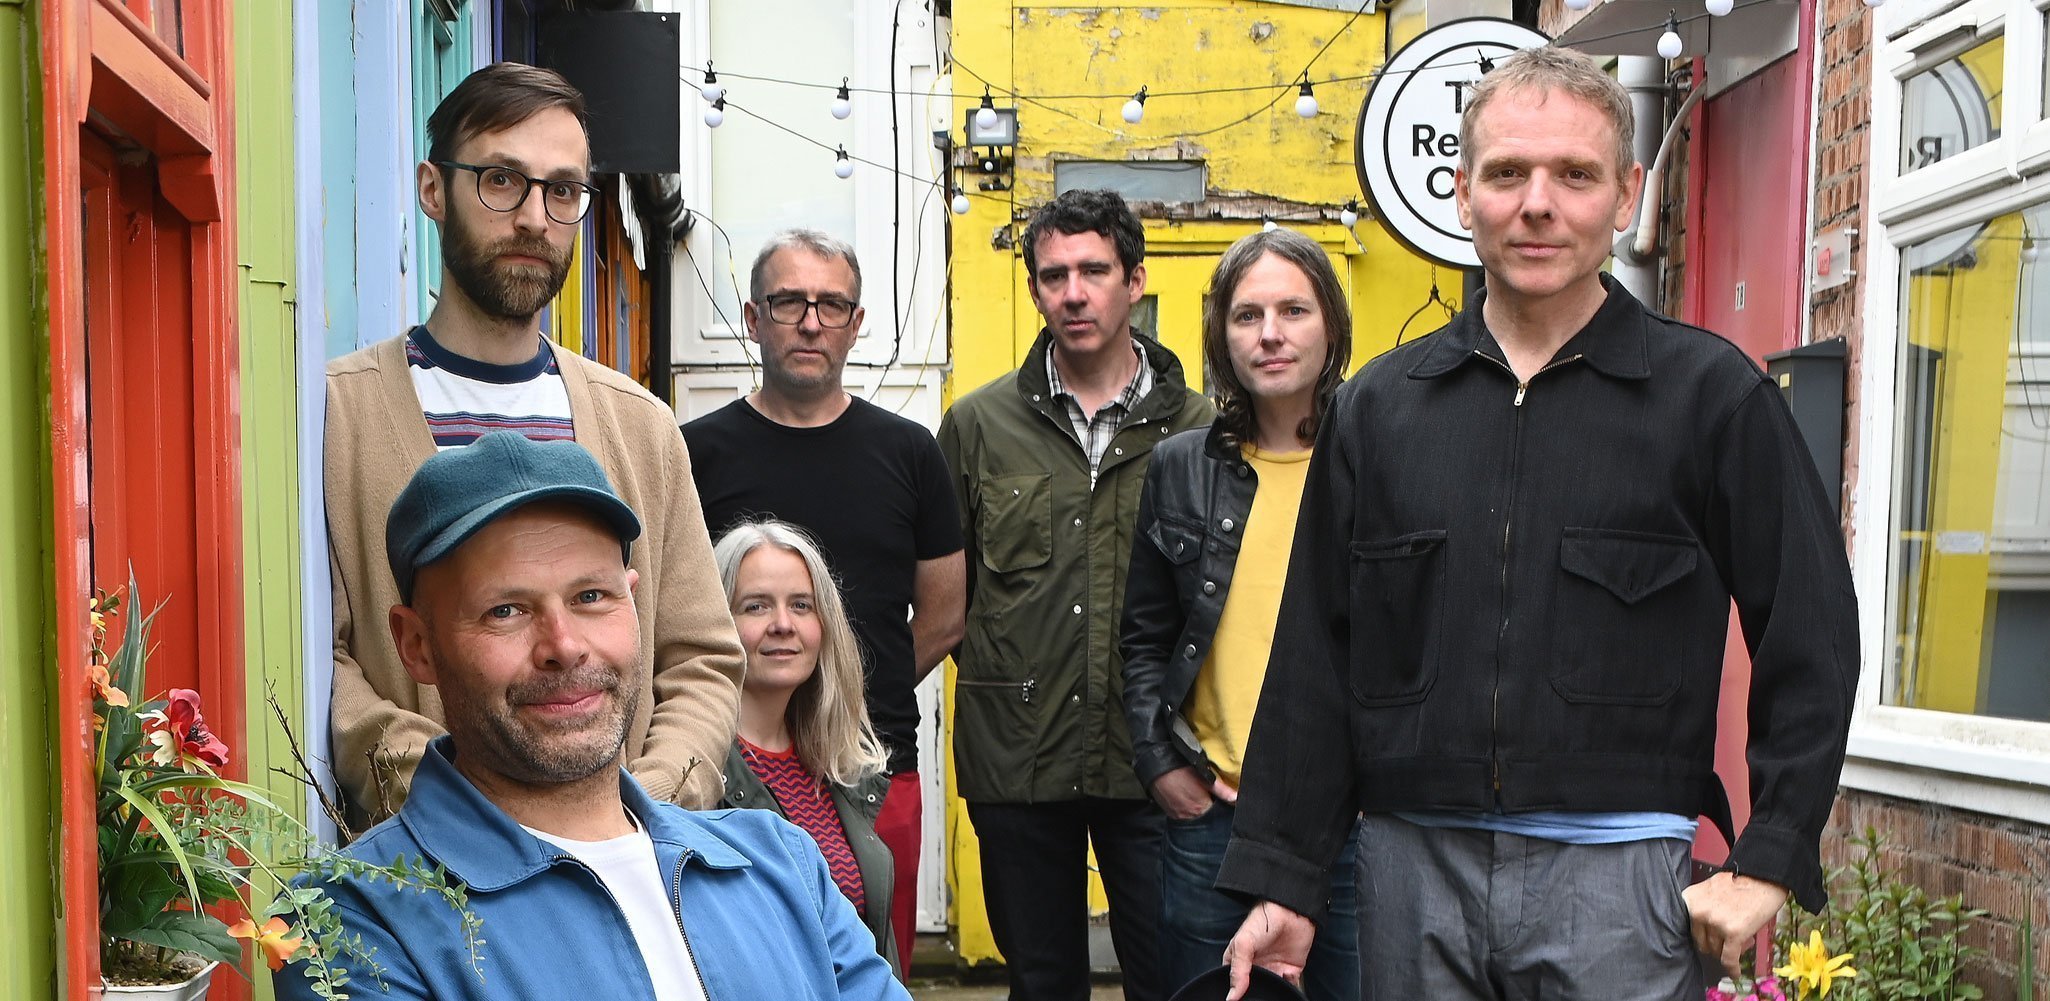 BELLE AND SEBASTIAN release the video for new single ‘This Letter’ - Watch Now 